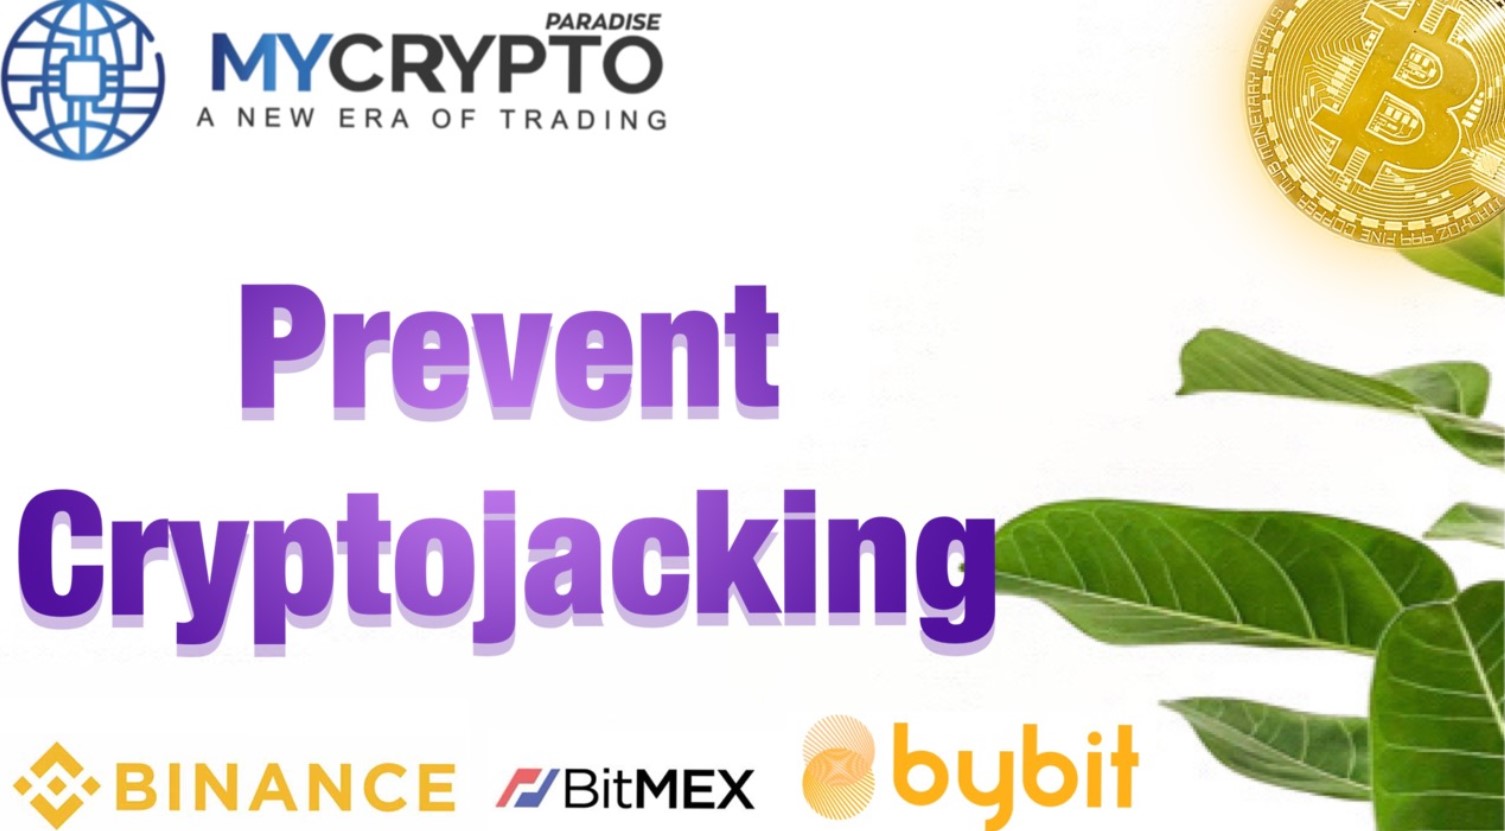 How to detect and prevent Crypto Jacking?